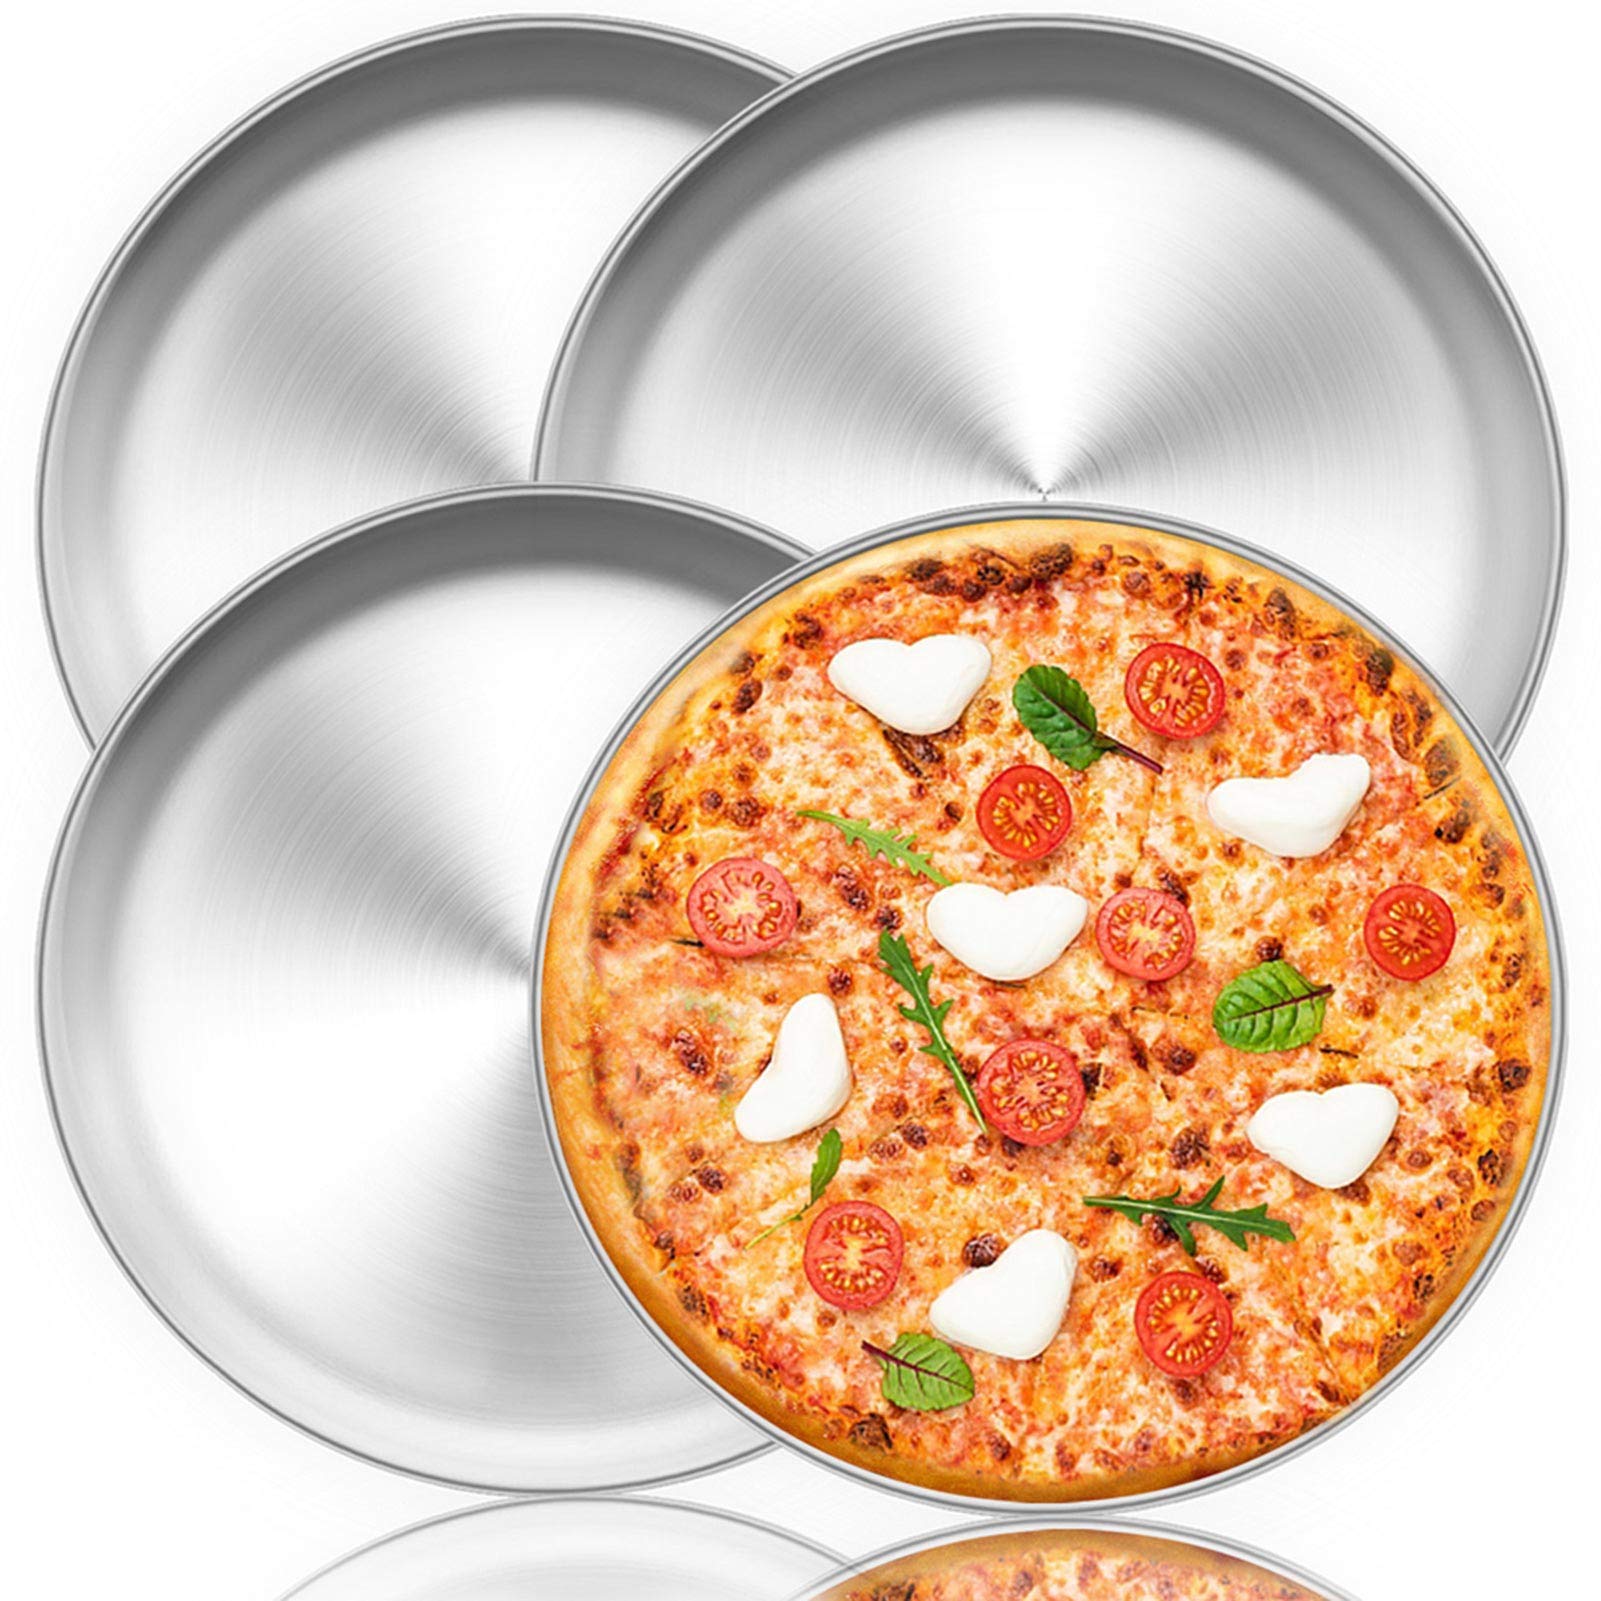 TeamFar Pizza Pan, 12 inch Pizza Pan Set Round Pizza Oven Baking Pans Tray Stainless Steel for Home Restaurant Party, Healthy & Heavy Duty, Dishwasher Safe & Easy Clean - Set of 4